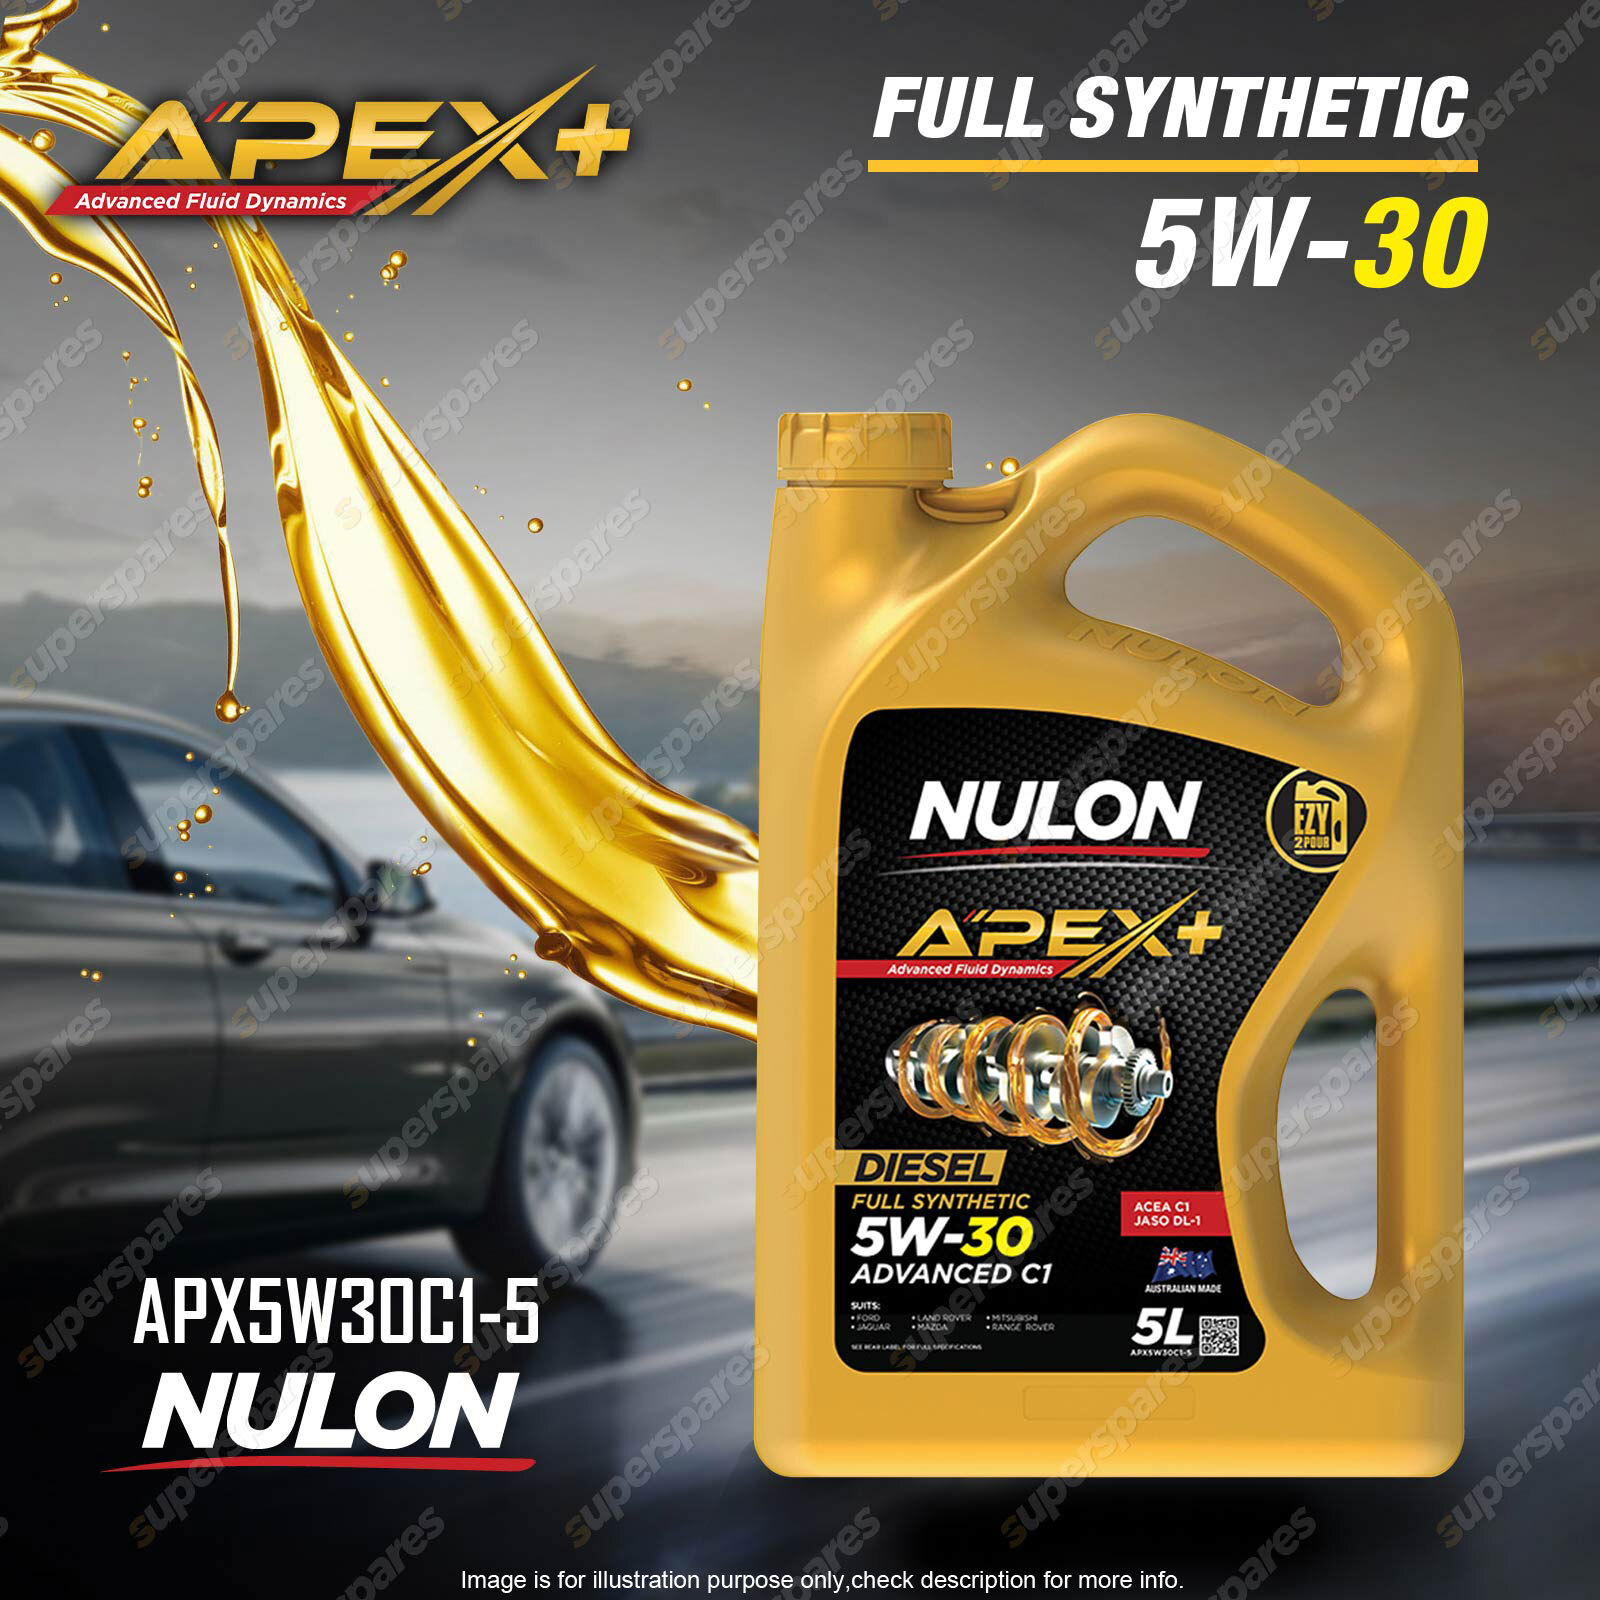 Nulon Full Synthetic 5W-30 Low Emission Diesel Engine Oil ...